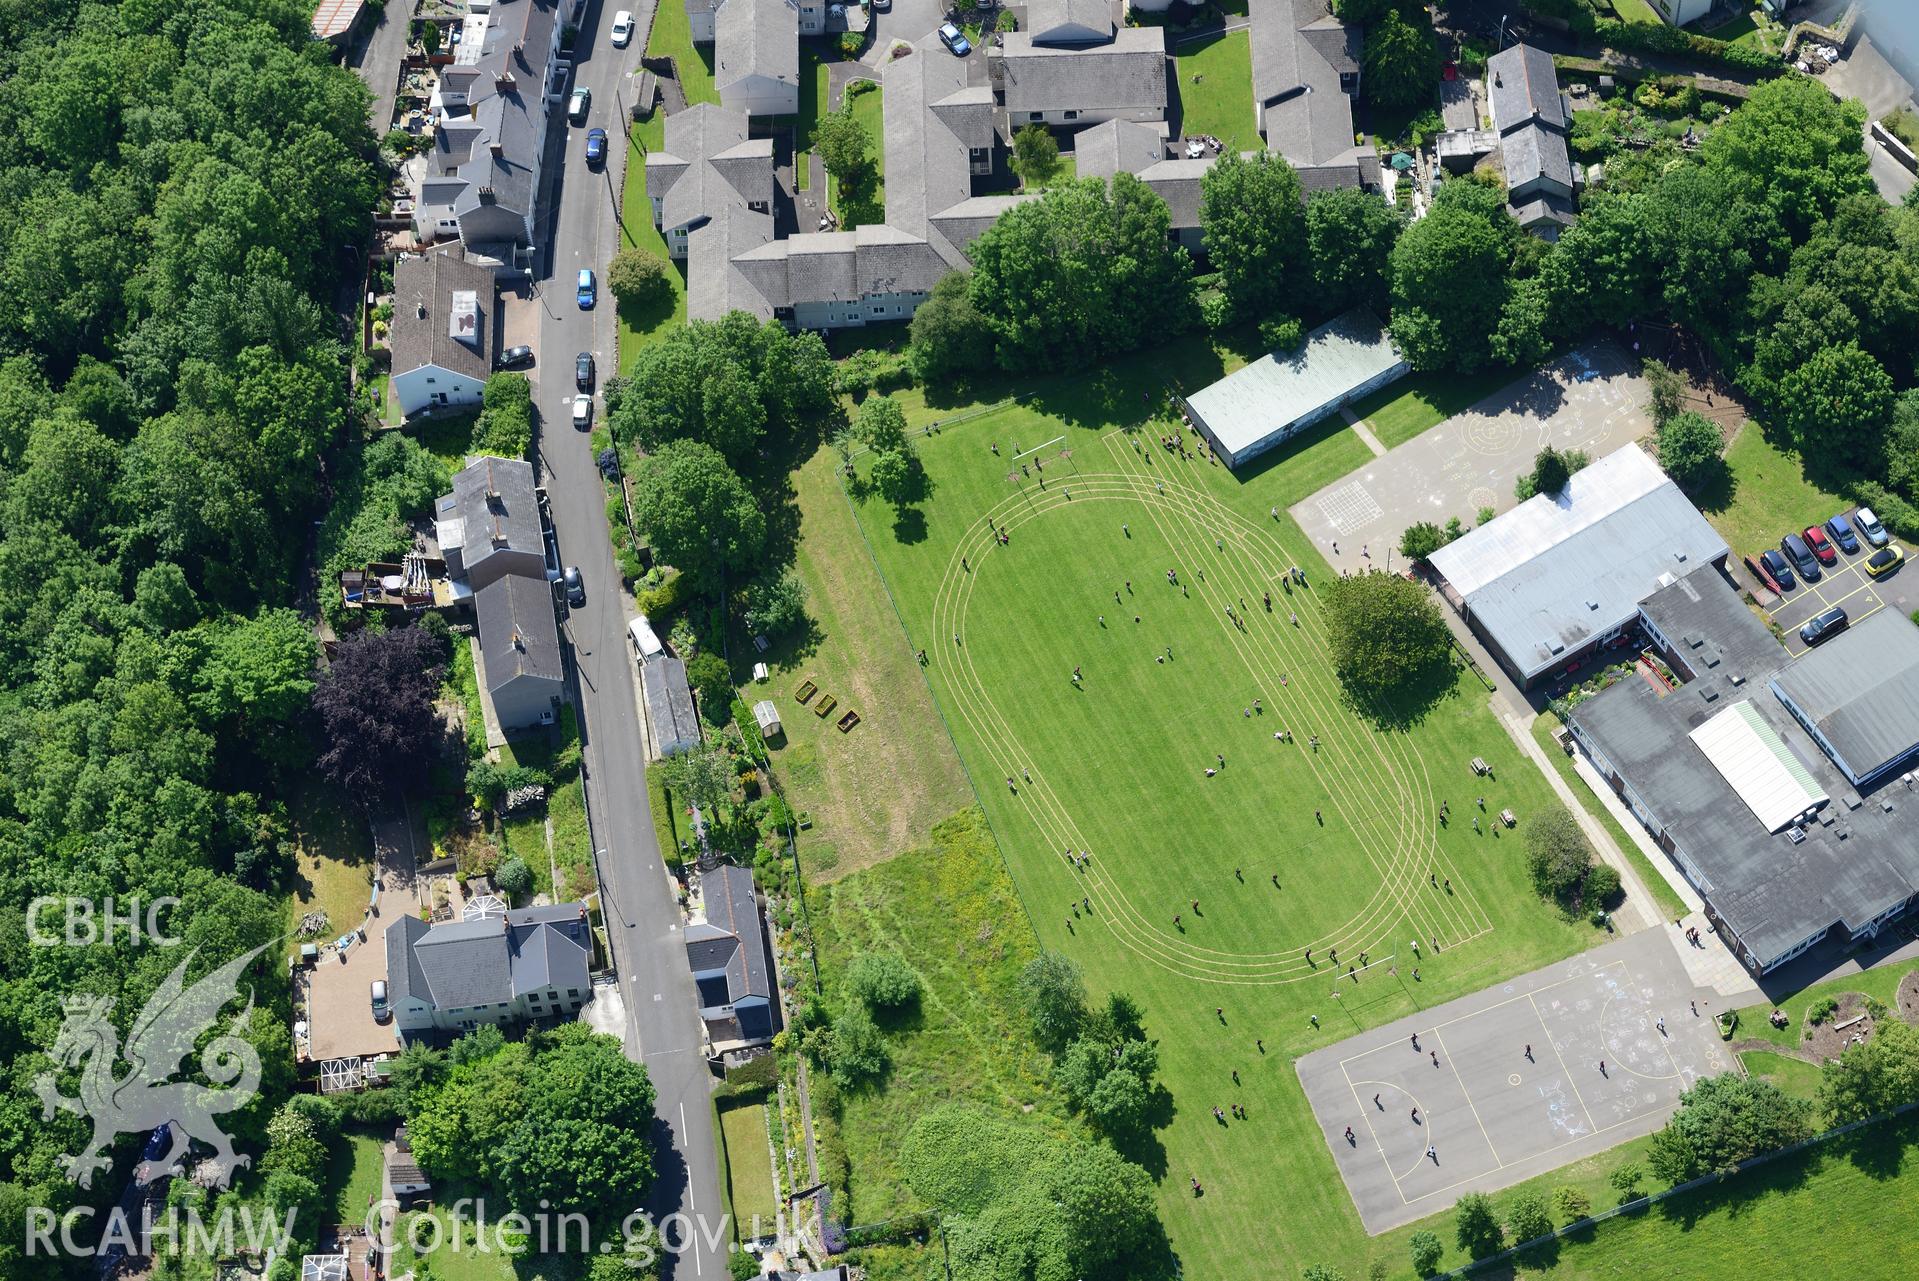 St. Mary's Catholic Primary School and playing fields, Bridgend. Oblique aerial photograph taken during the Royal Commission's programme of archaeological aerial reconnaissance by Toby Driver on 19th June 2015.